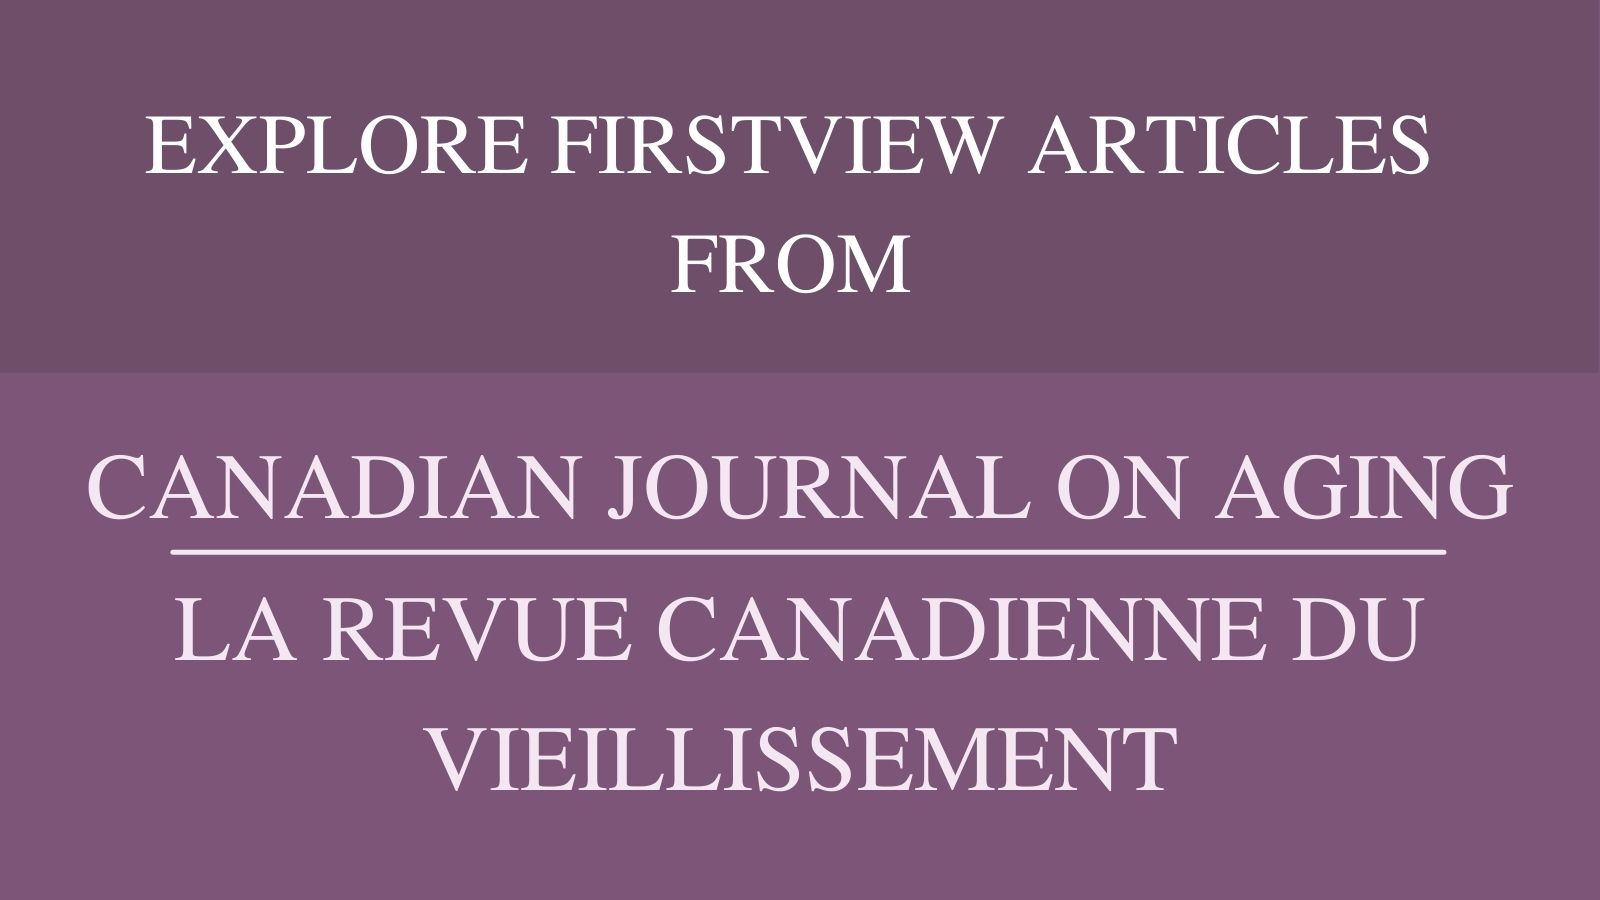 Explore FirstView articles from Canadian Journal on Aging